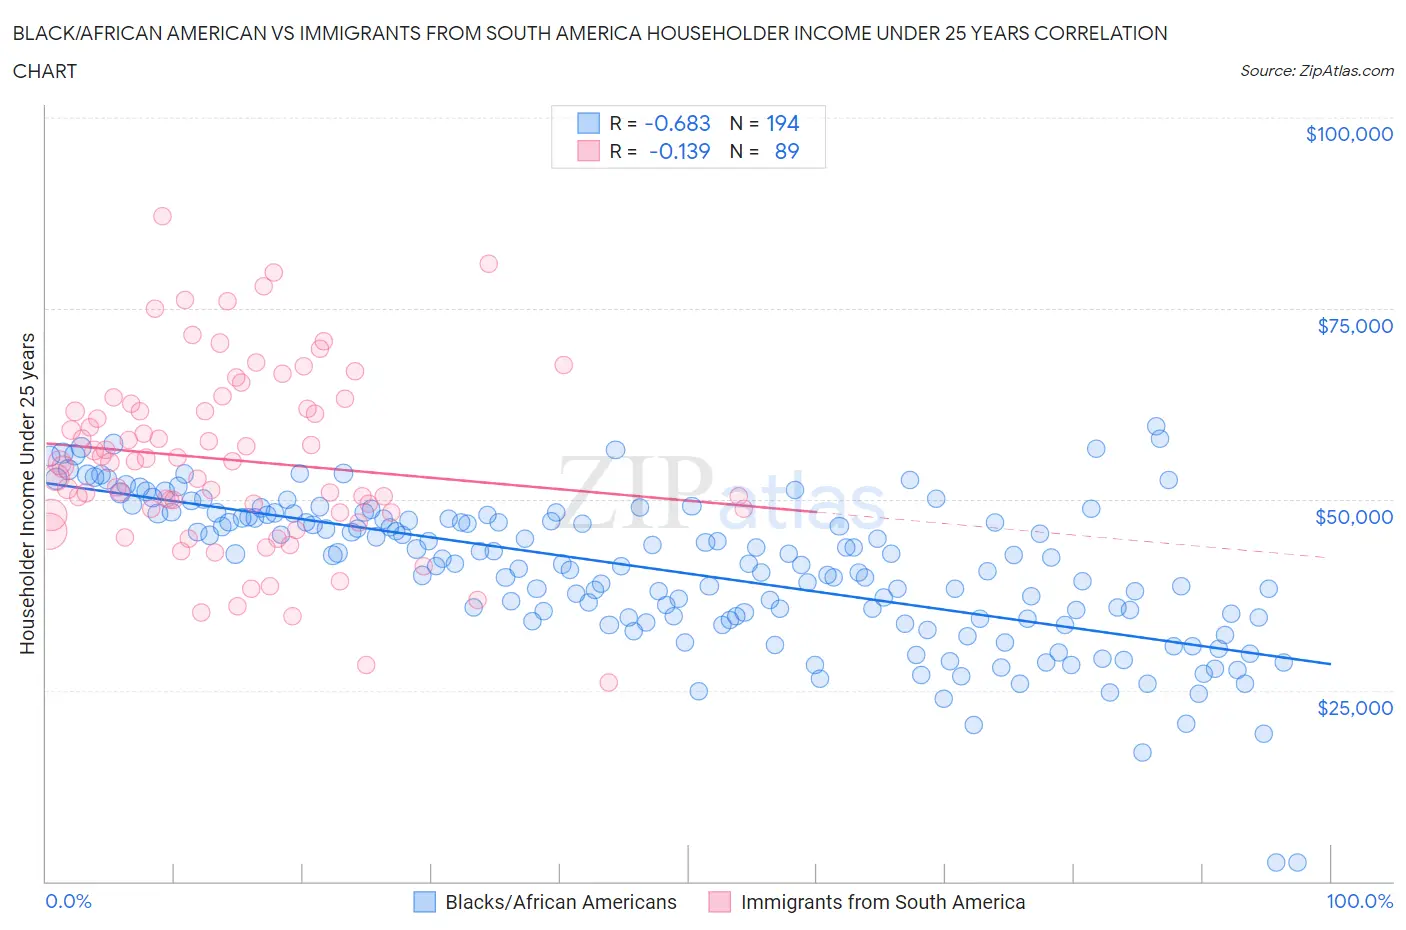 Black/African American vs Immigrants from South America Householder Income Under 25 years